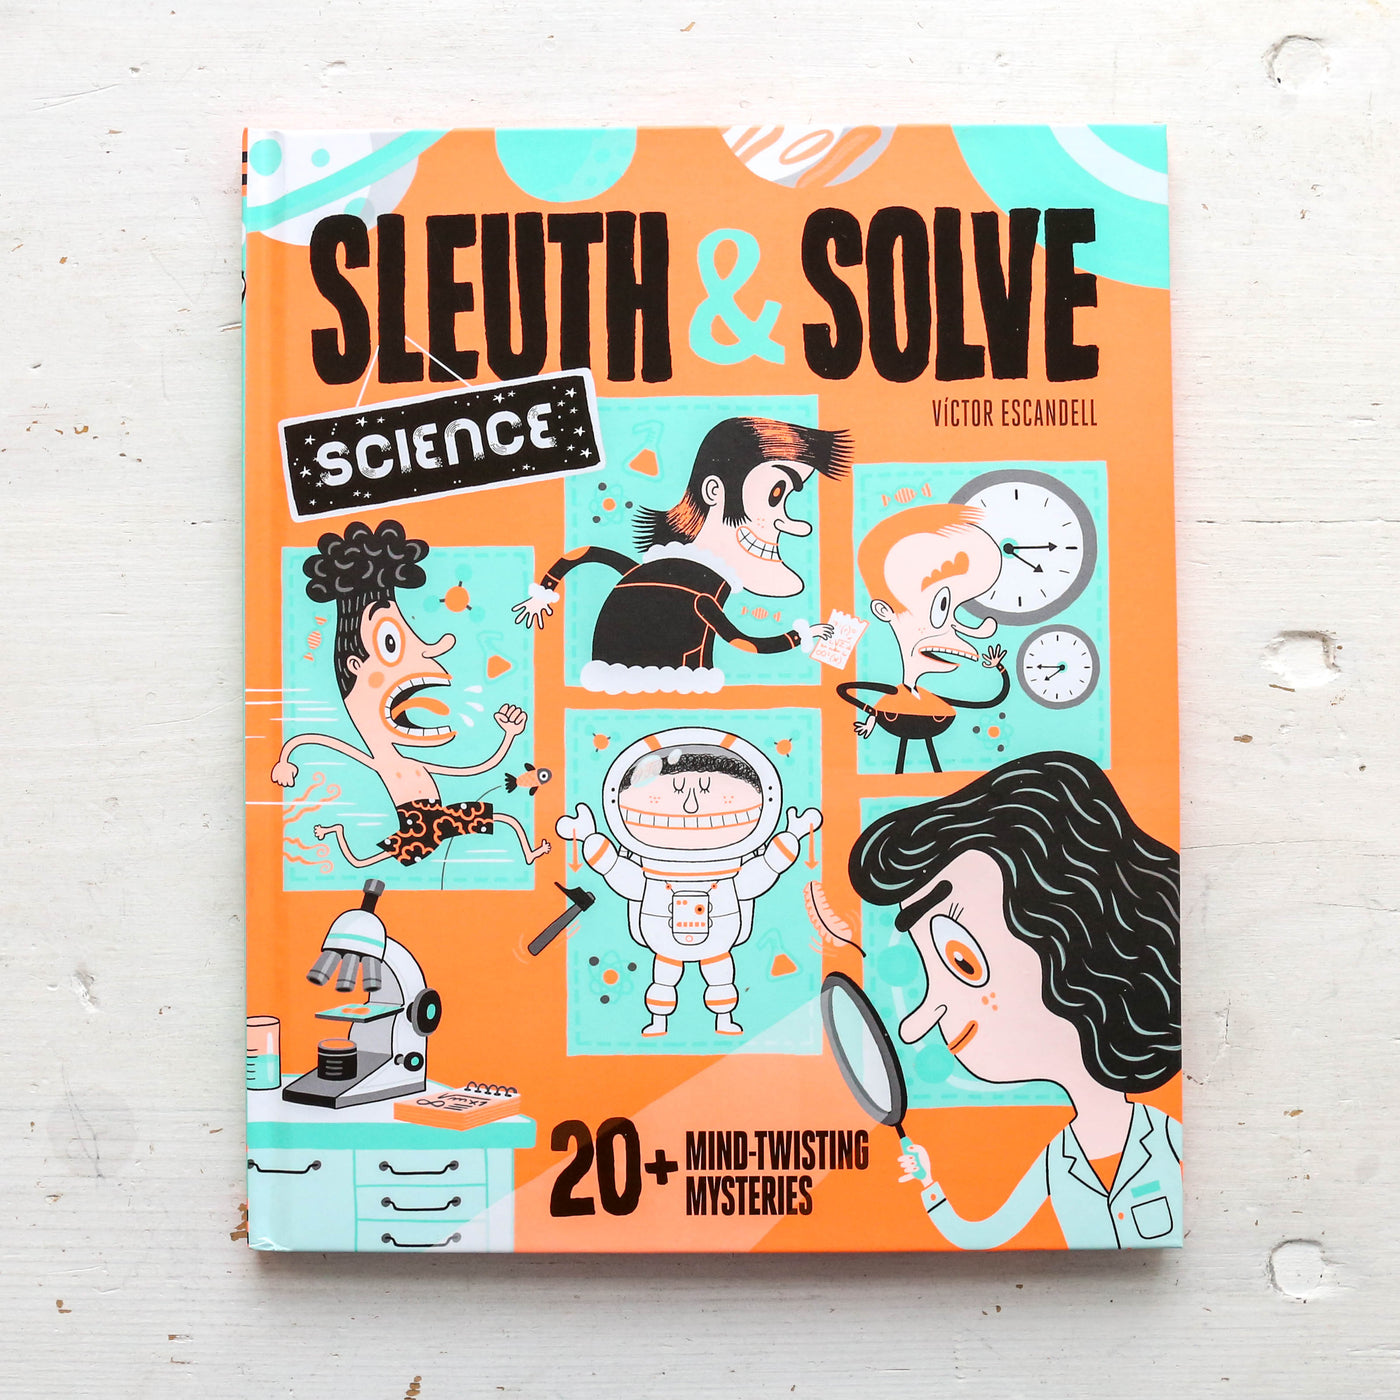 Sleuth & Solve: Science